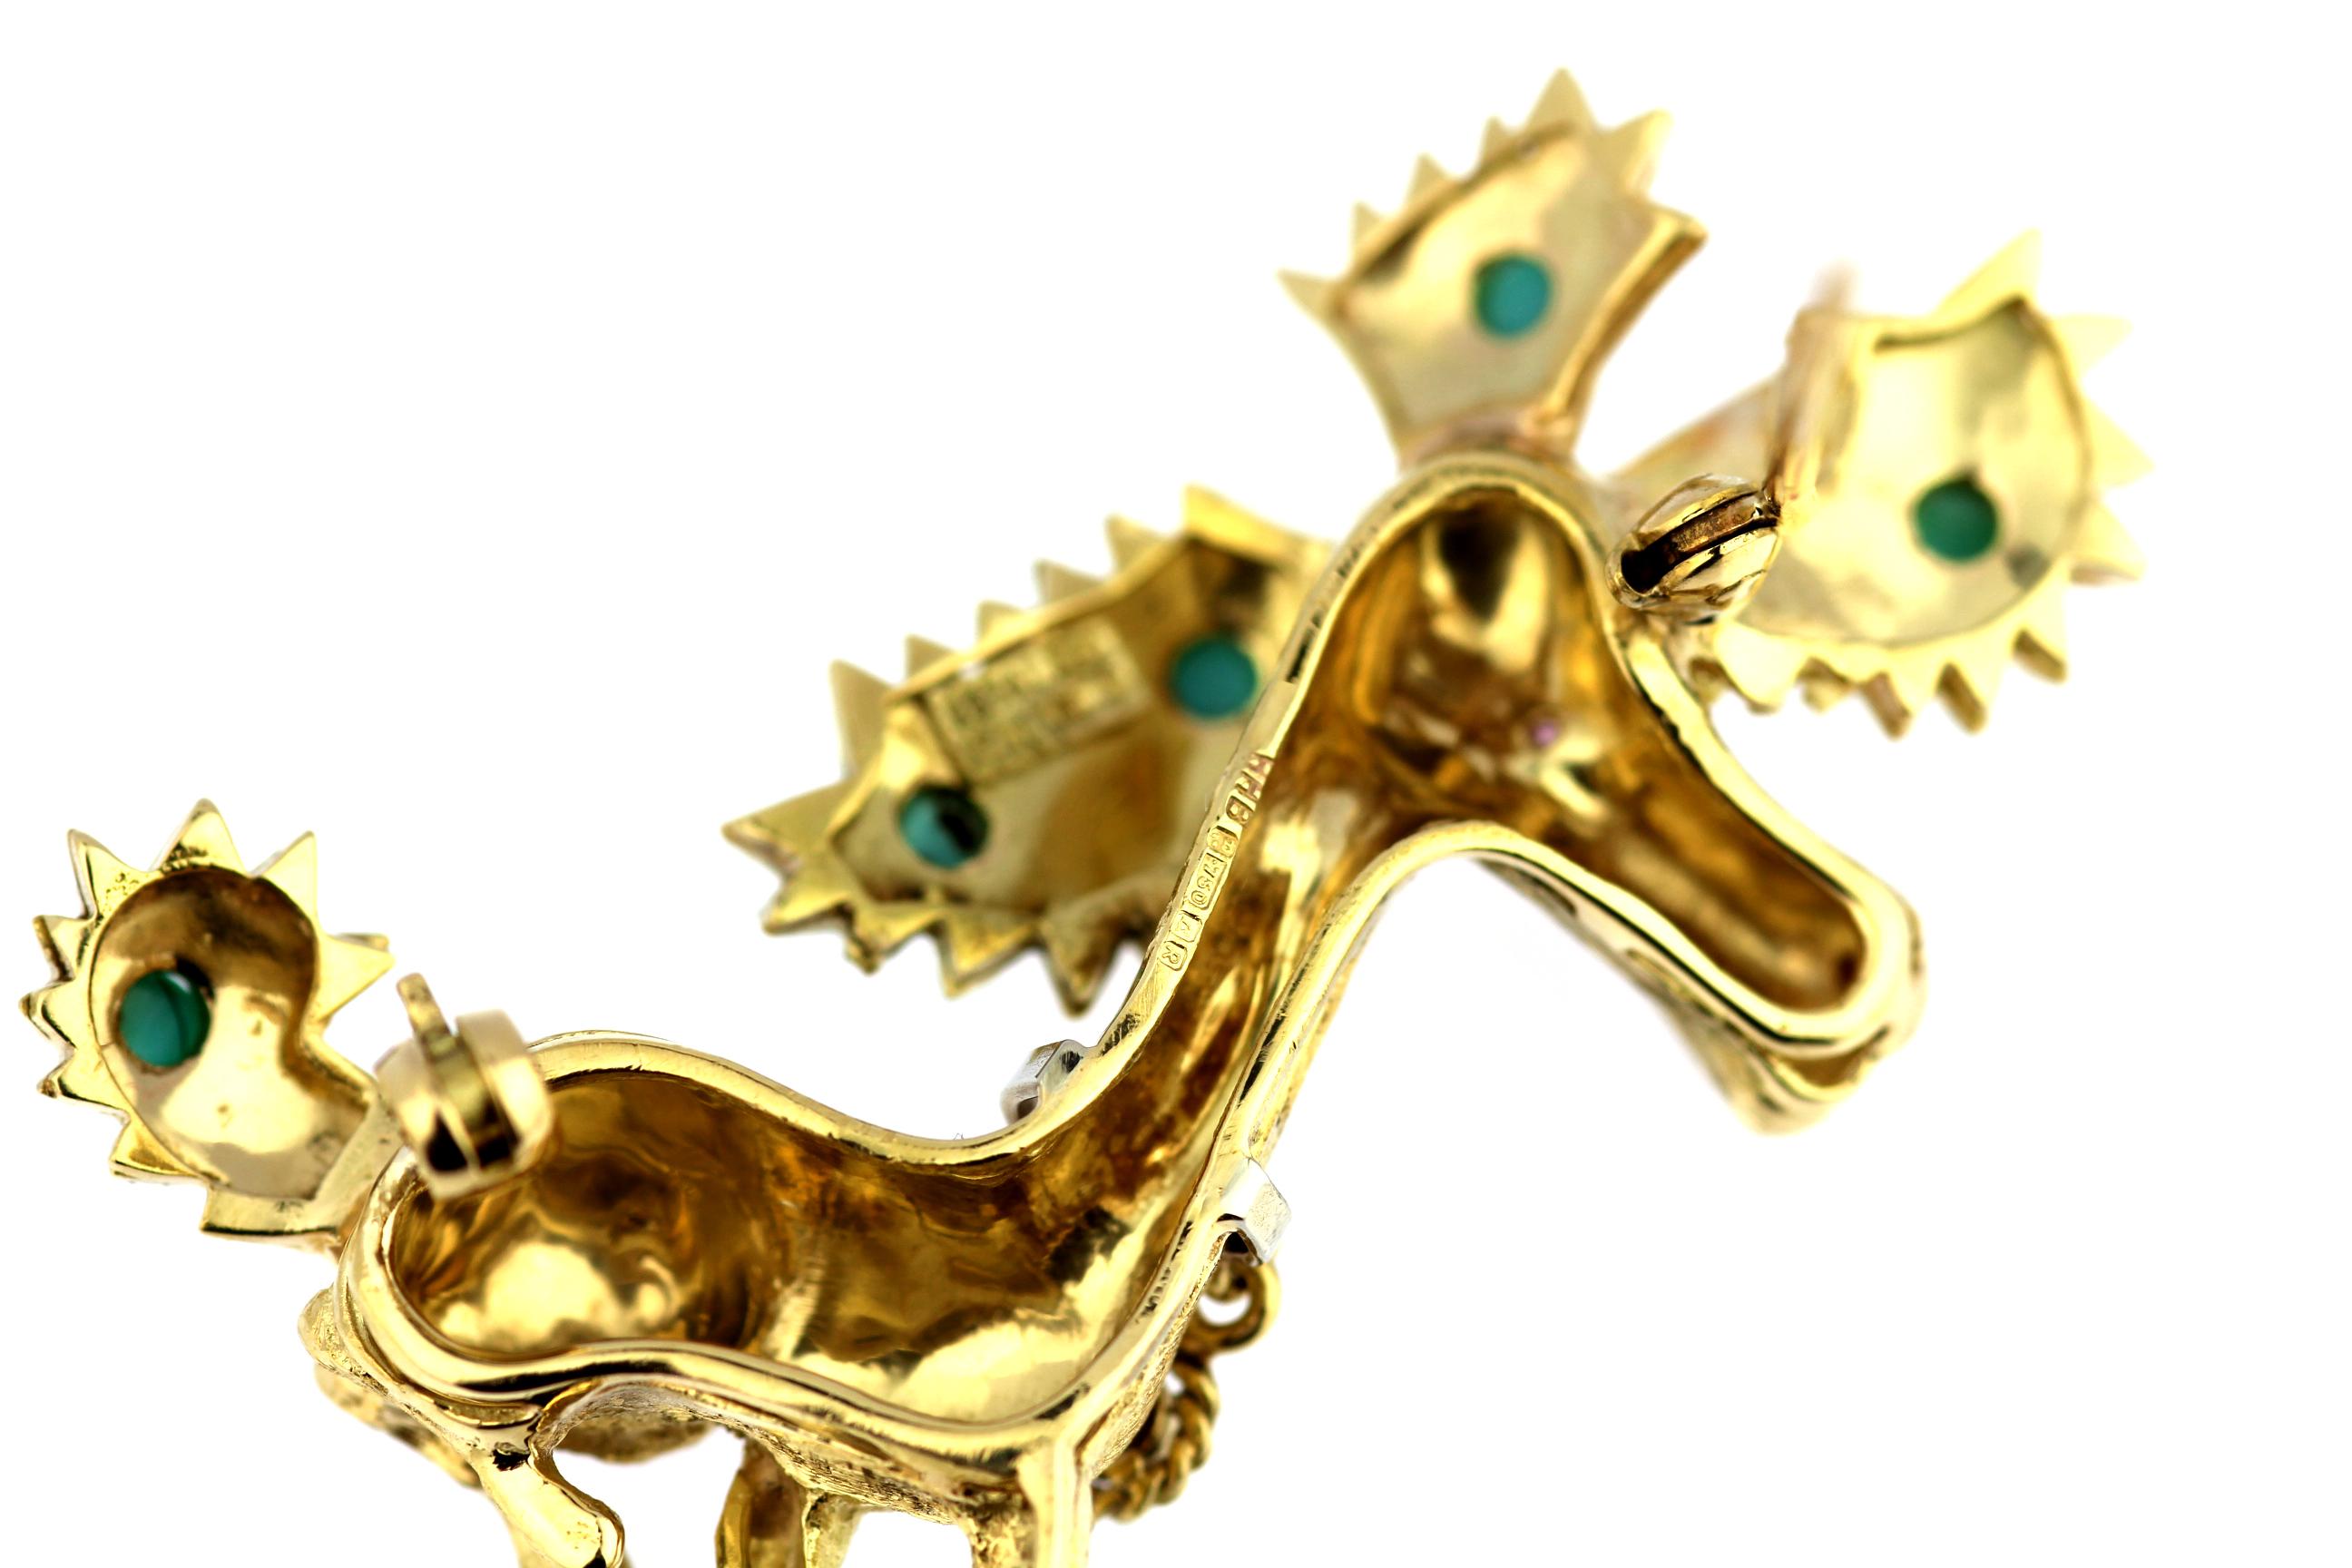 Women's Retro 1960s Stylized 3D Poodle /Puppy /Dog Pin / Brooch in 18 K Gold & Turquoise